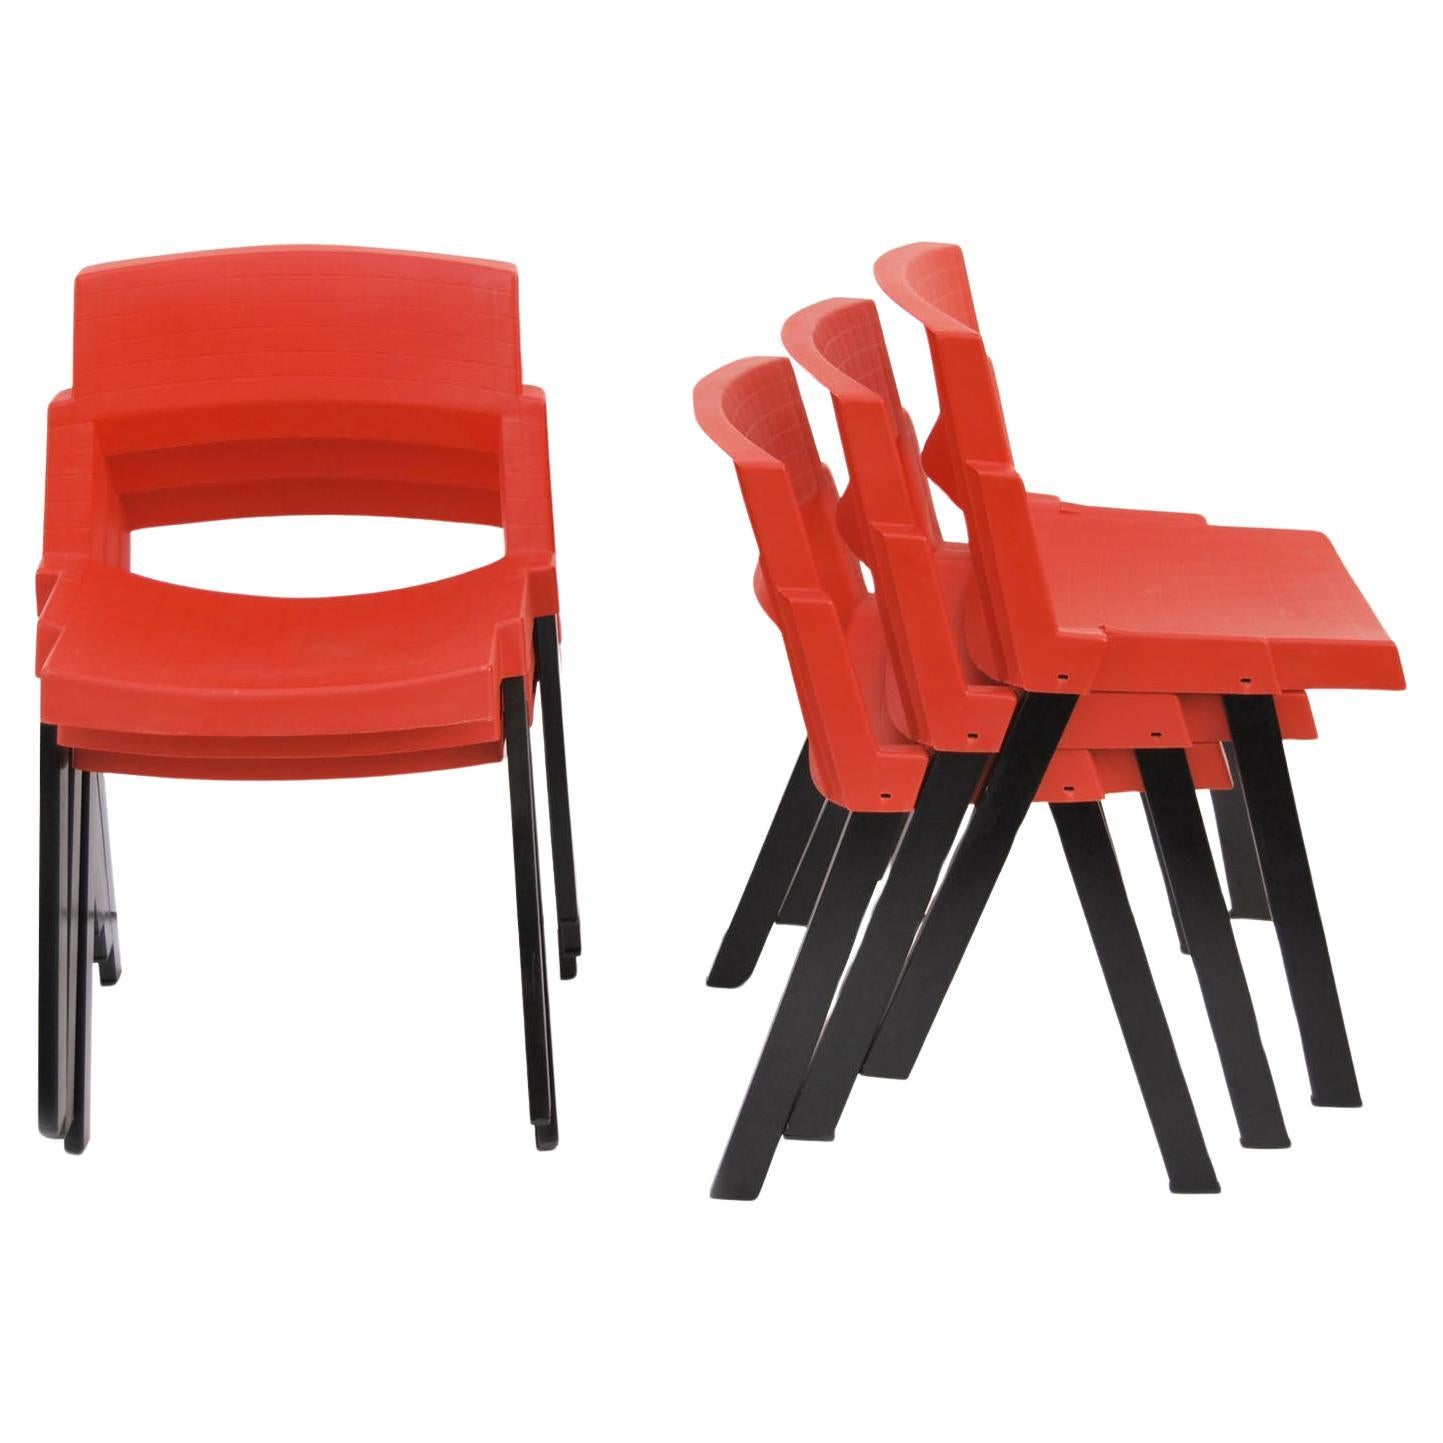 Six red and black CITY dining chairs by Lucci & Orlandini for Lamm 